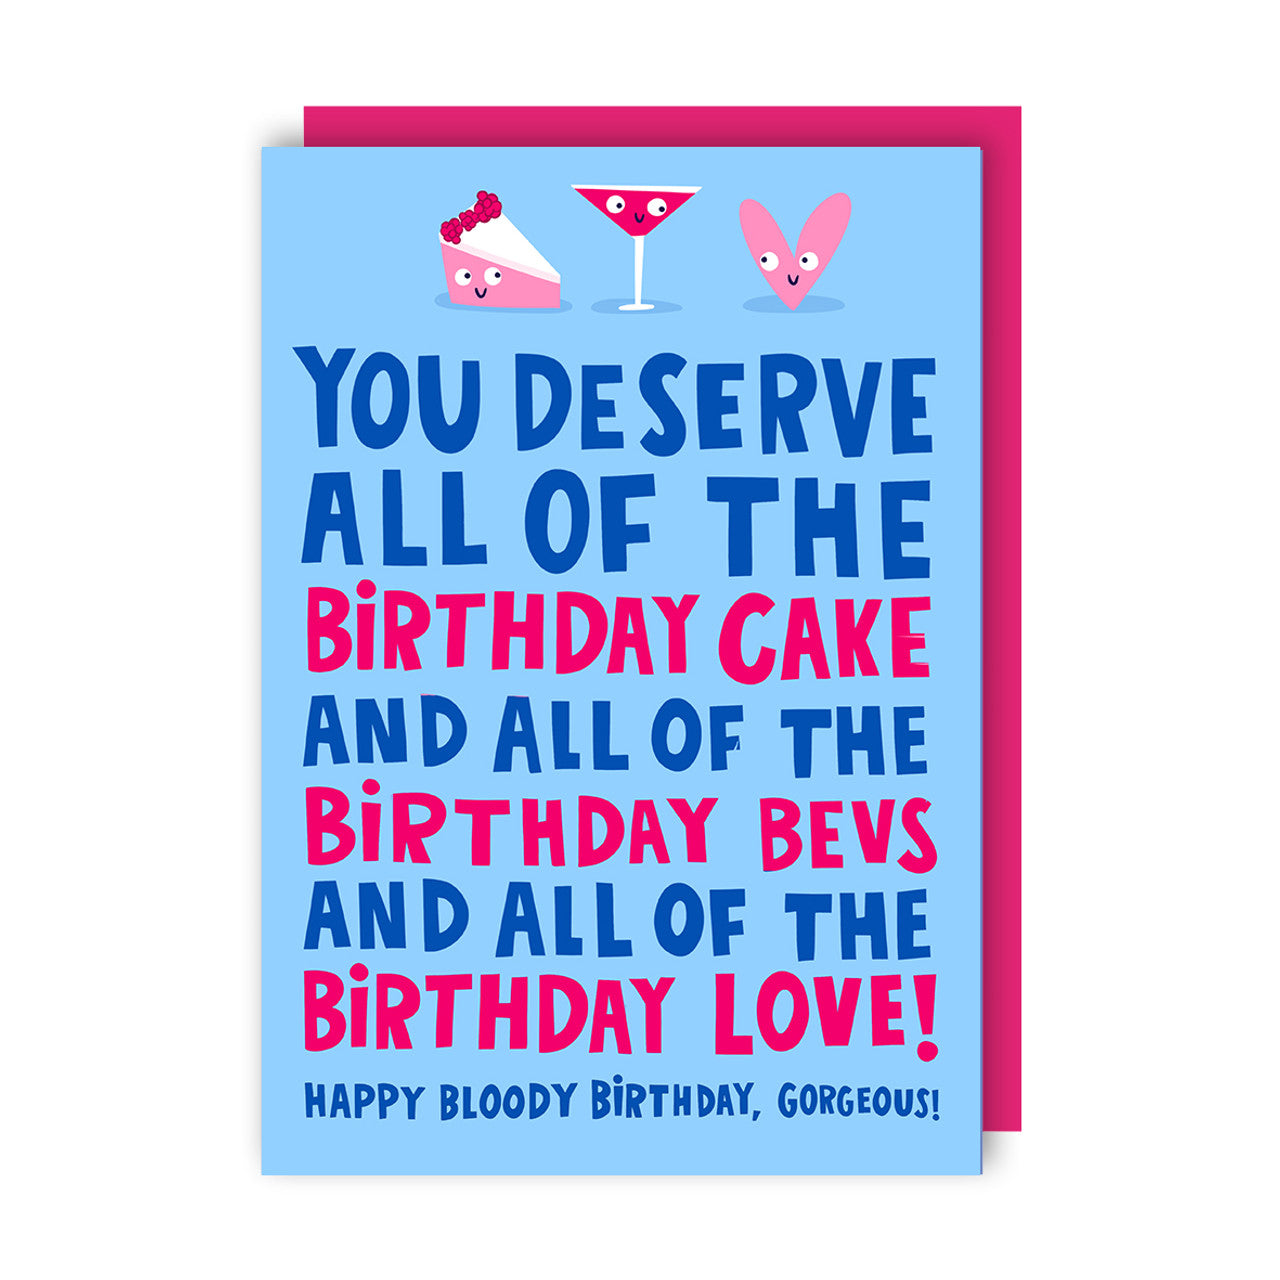 Birthday Card text reads "You deserve all of the birthday cake and all of the birthday bevs and all of the birthday love! Happy bloody Birthday, gorgeous!"